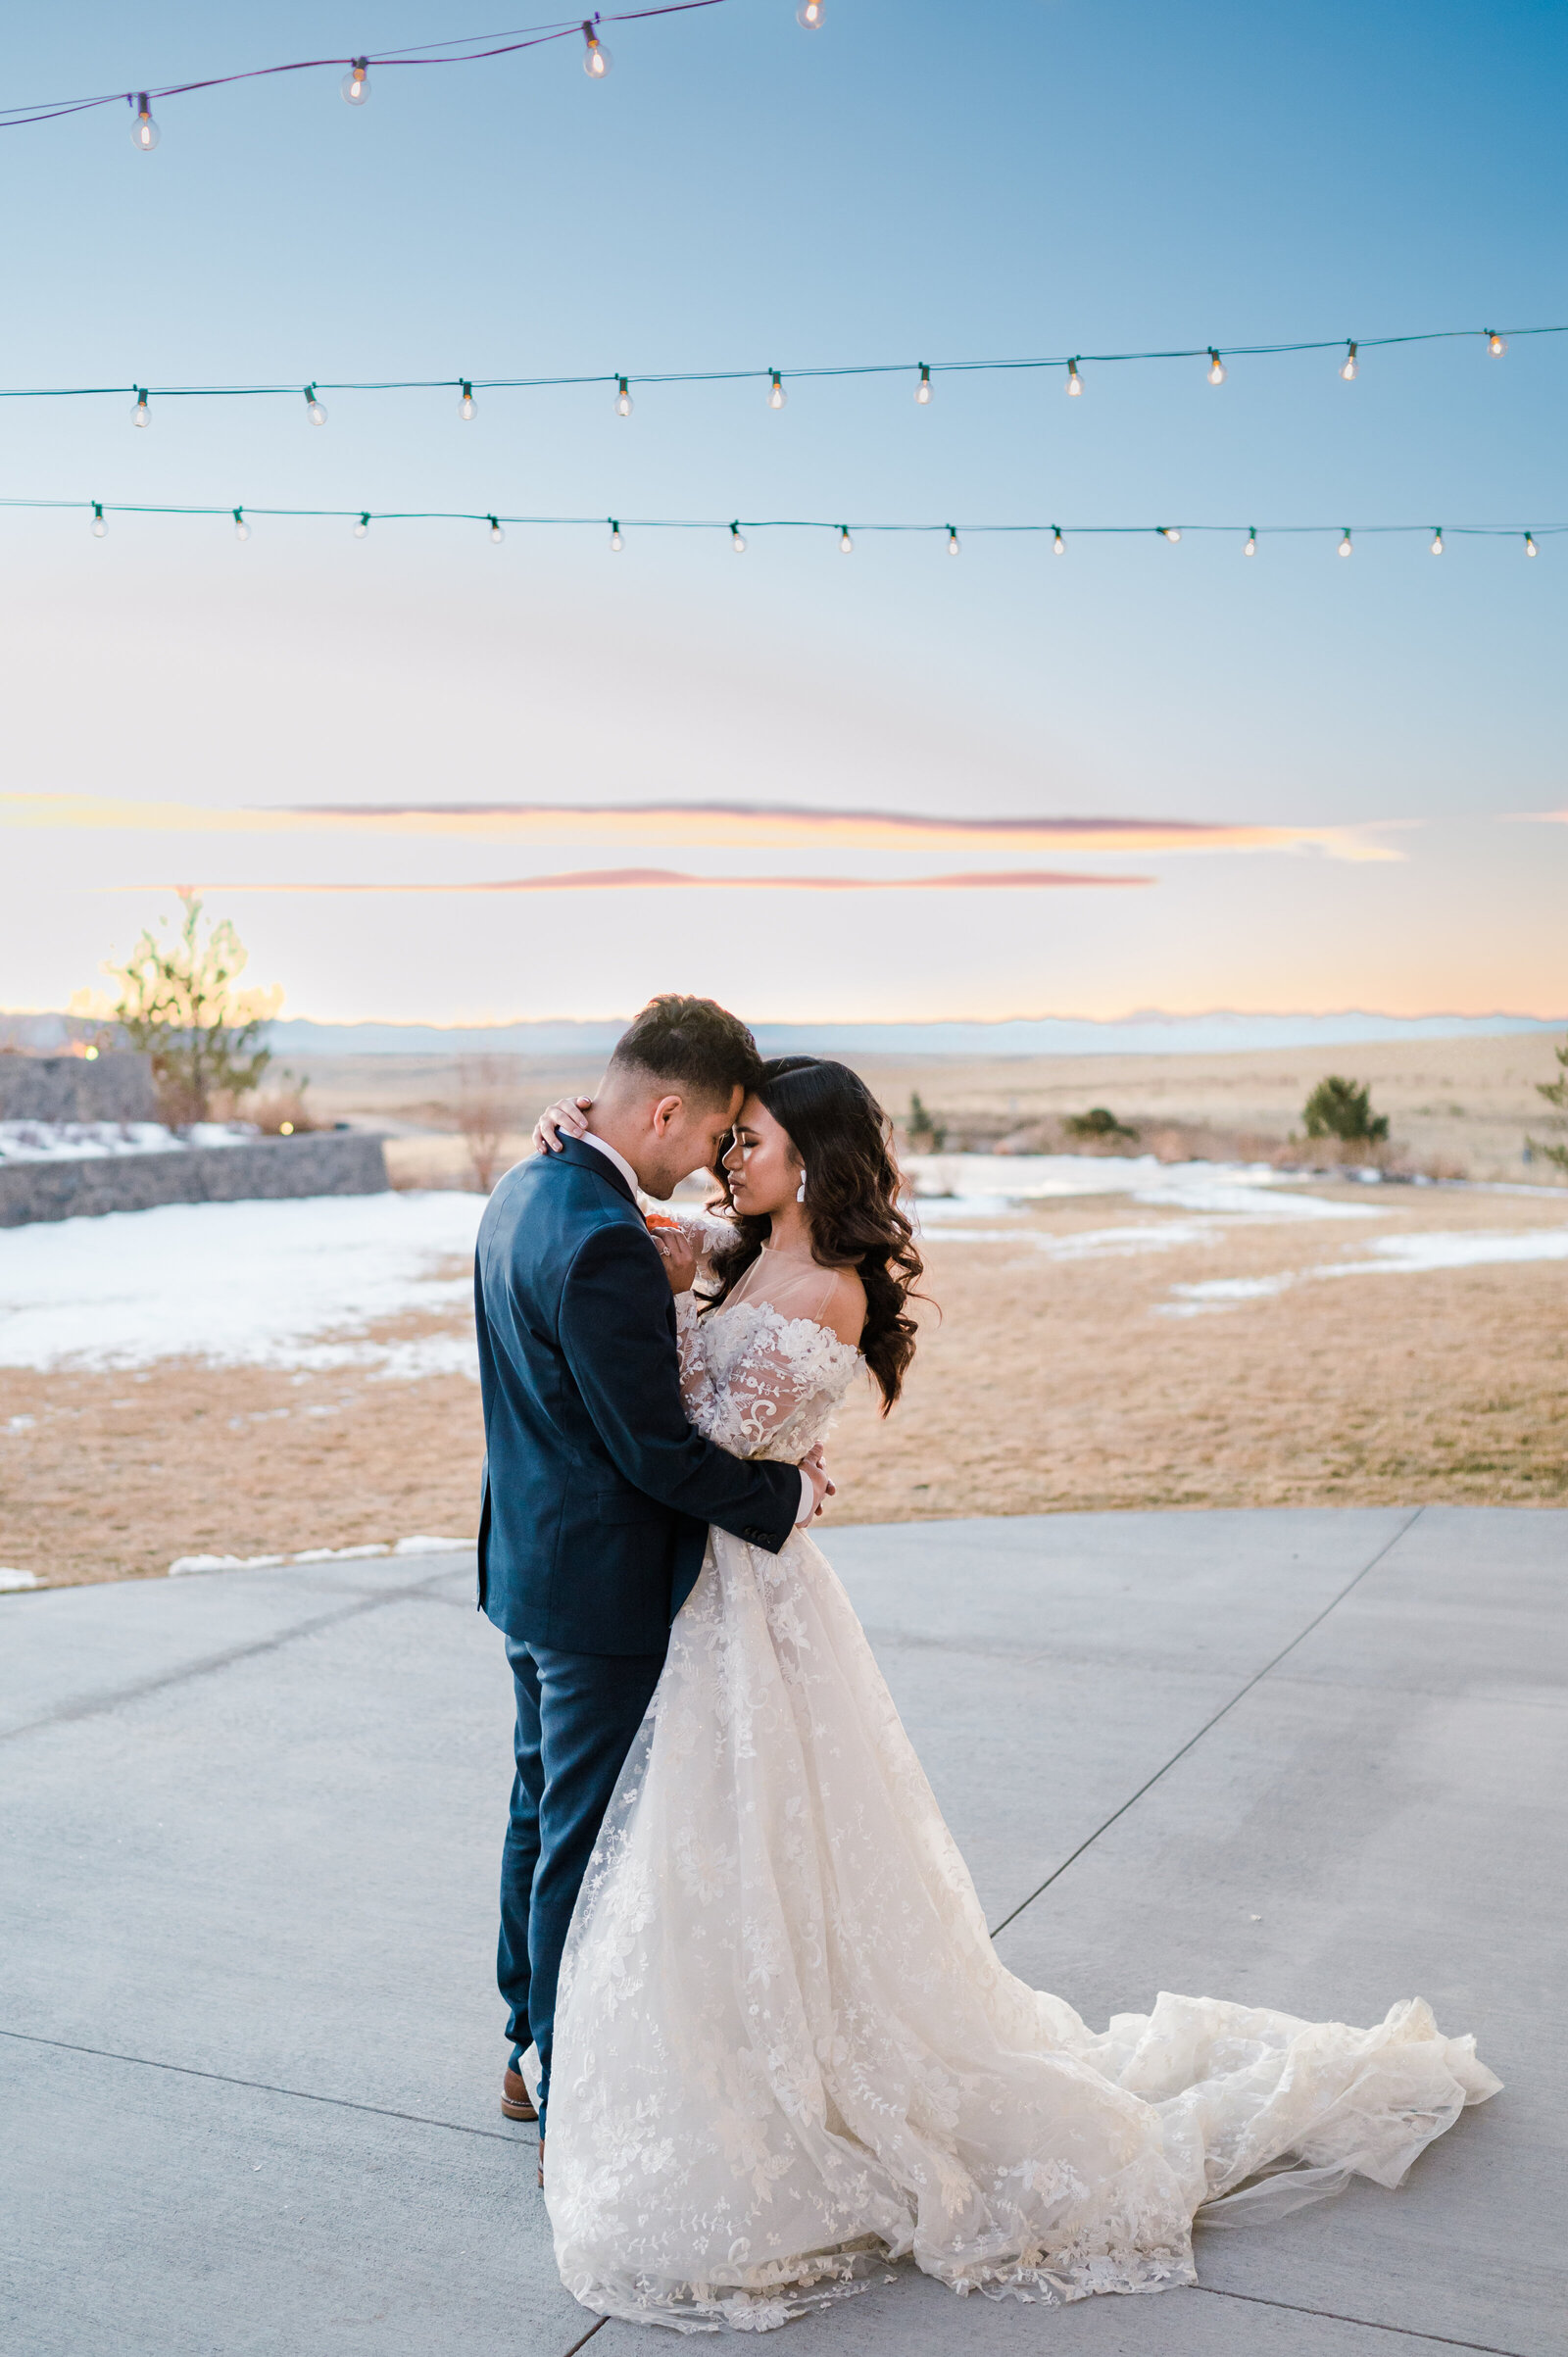 Bride in gorgeous strapless dress and Groom in handsome suit embrace during their first dance at sunset on patio